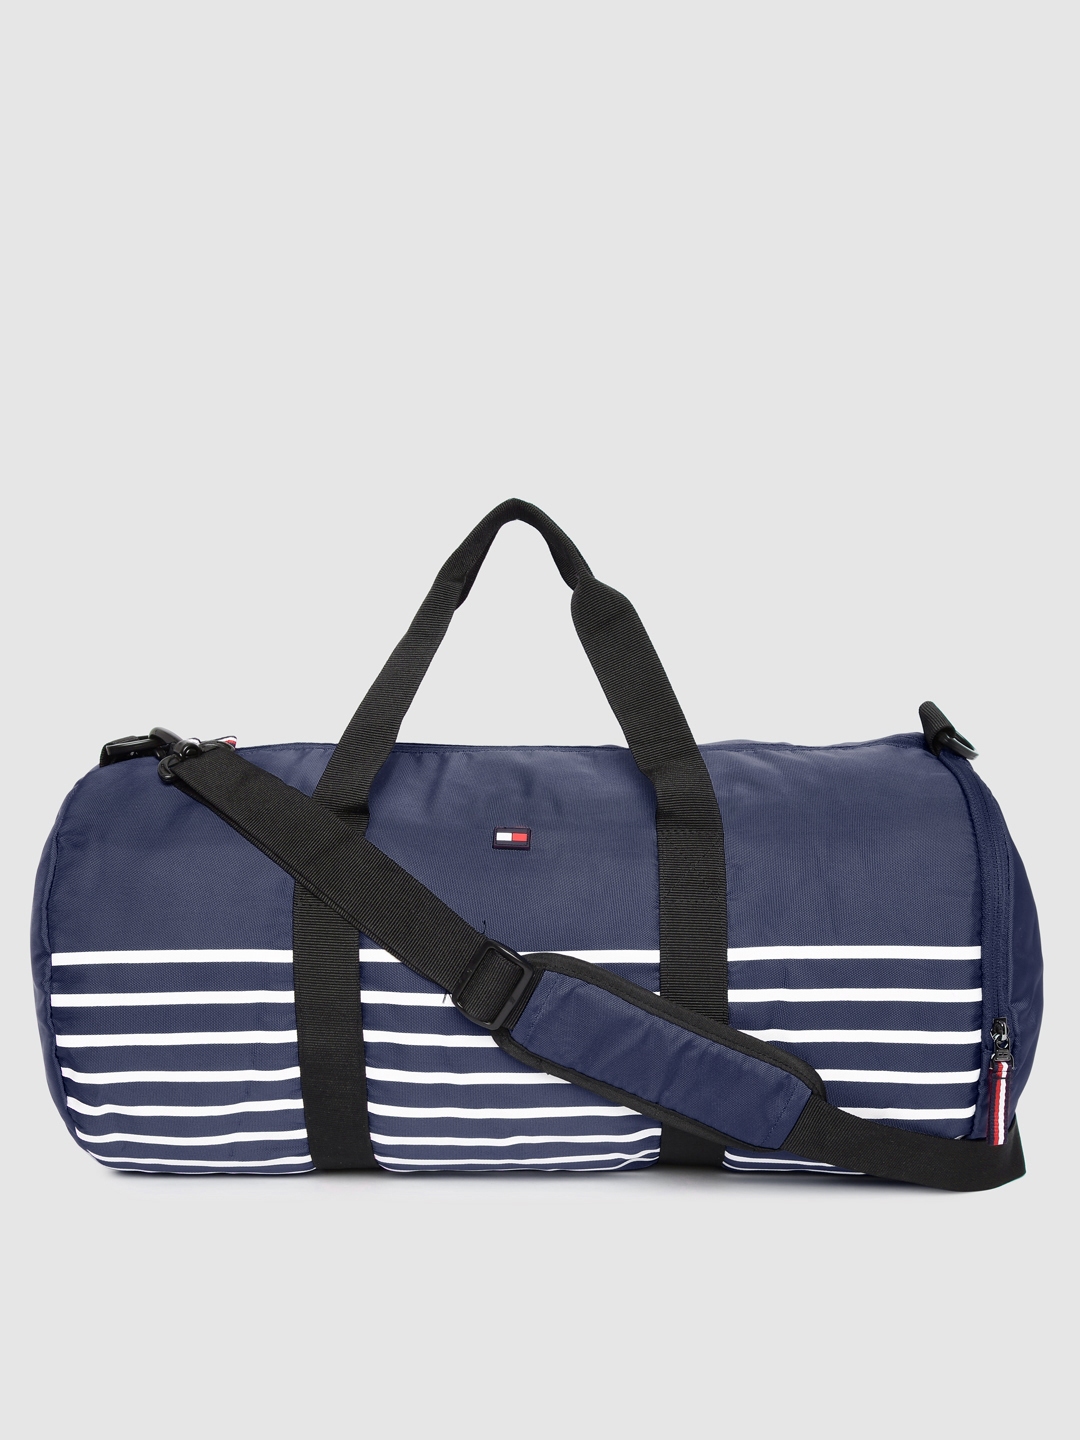 Buy Tommy Hilfiger Unisex Navy Blue And White Striped Duffel Bag Duffel Bag For Unisex 11698694